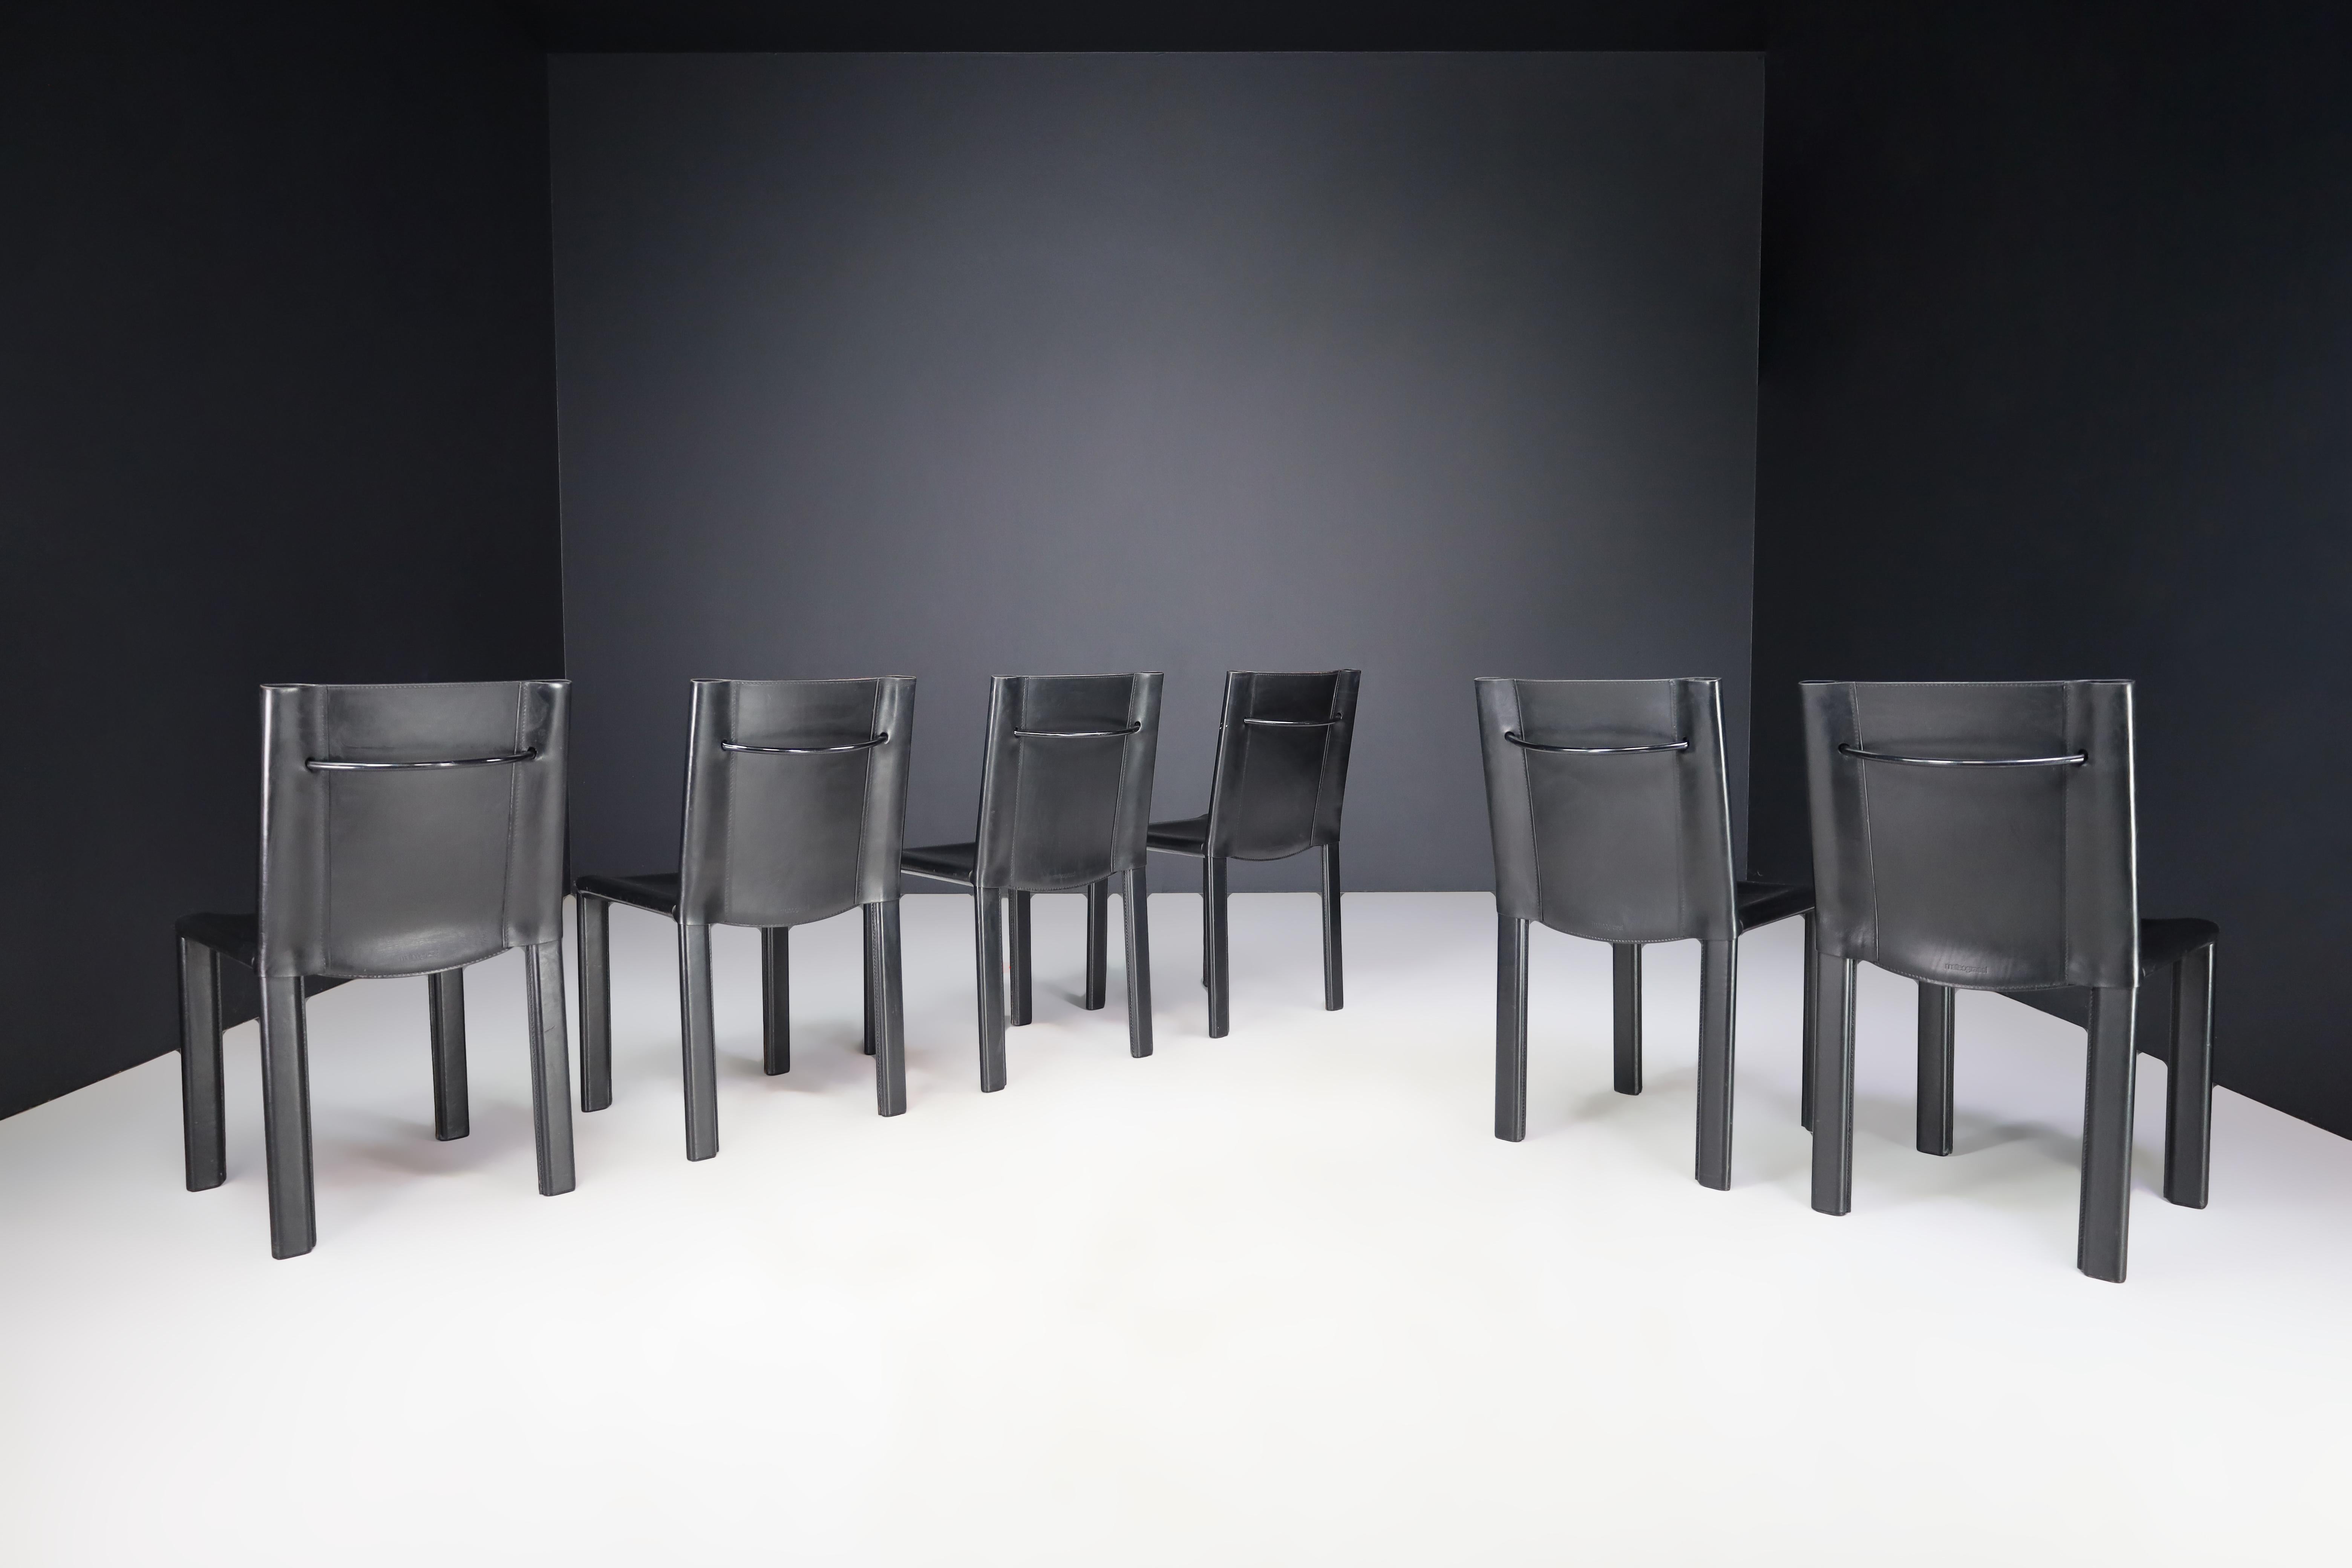 Late 20th Century Carlo Bartoli Black Leather Dining Room Chairs for Matteo Grassi Italy 1980s  For Sale